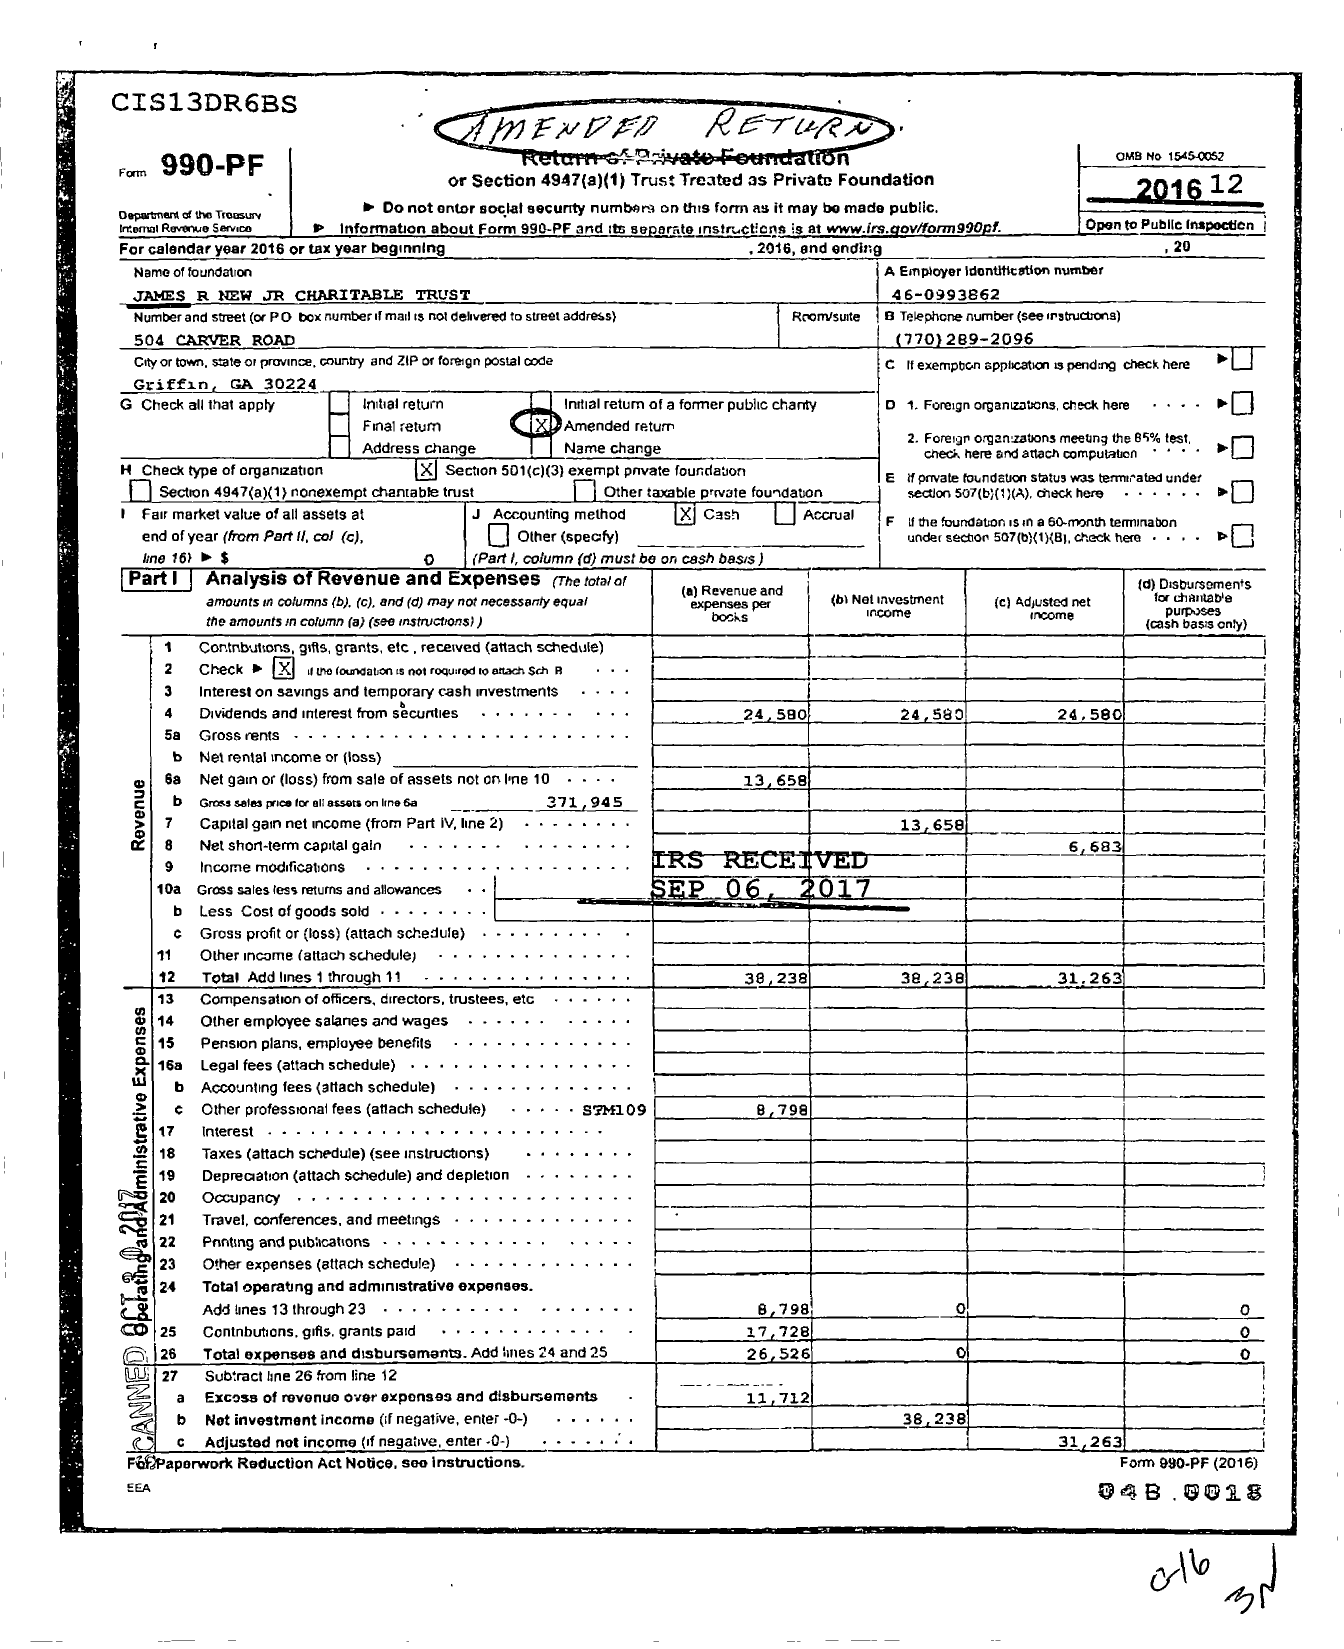 Image of first page of 2016 Form 990PF for James R New Chaitible Trust